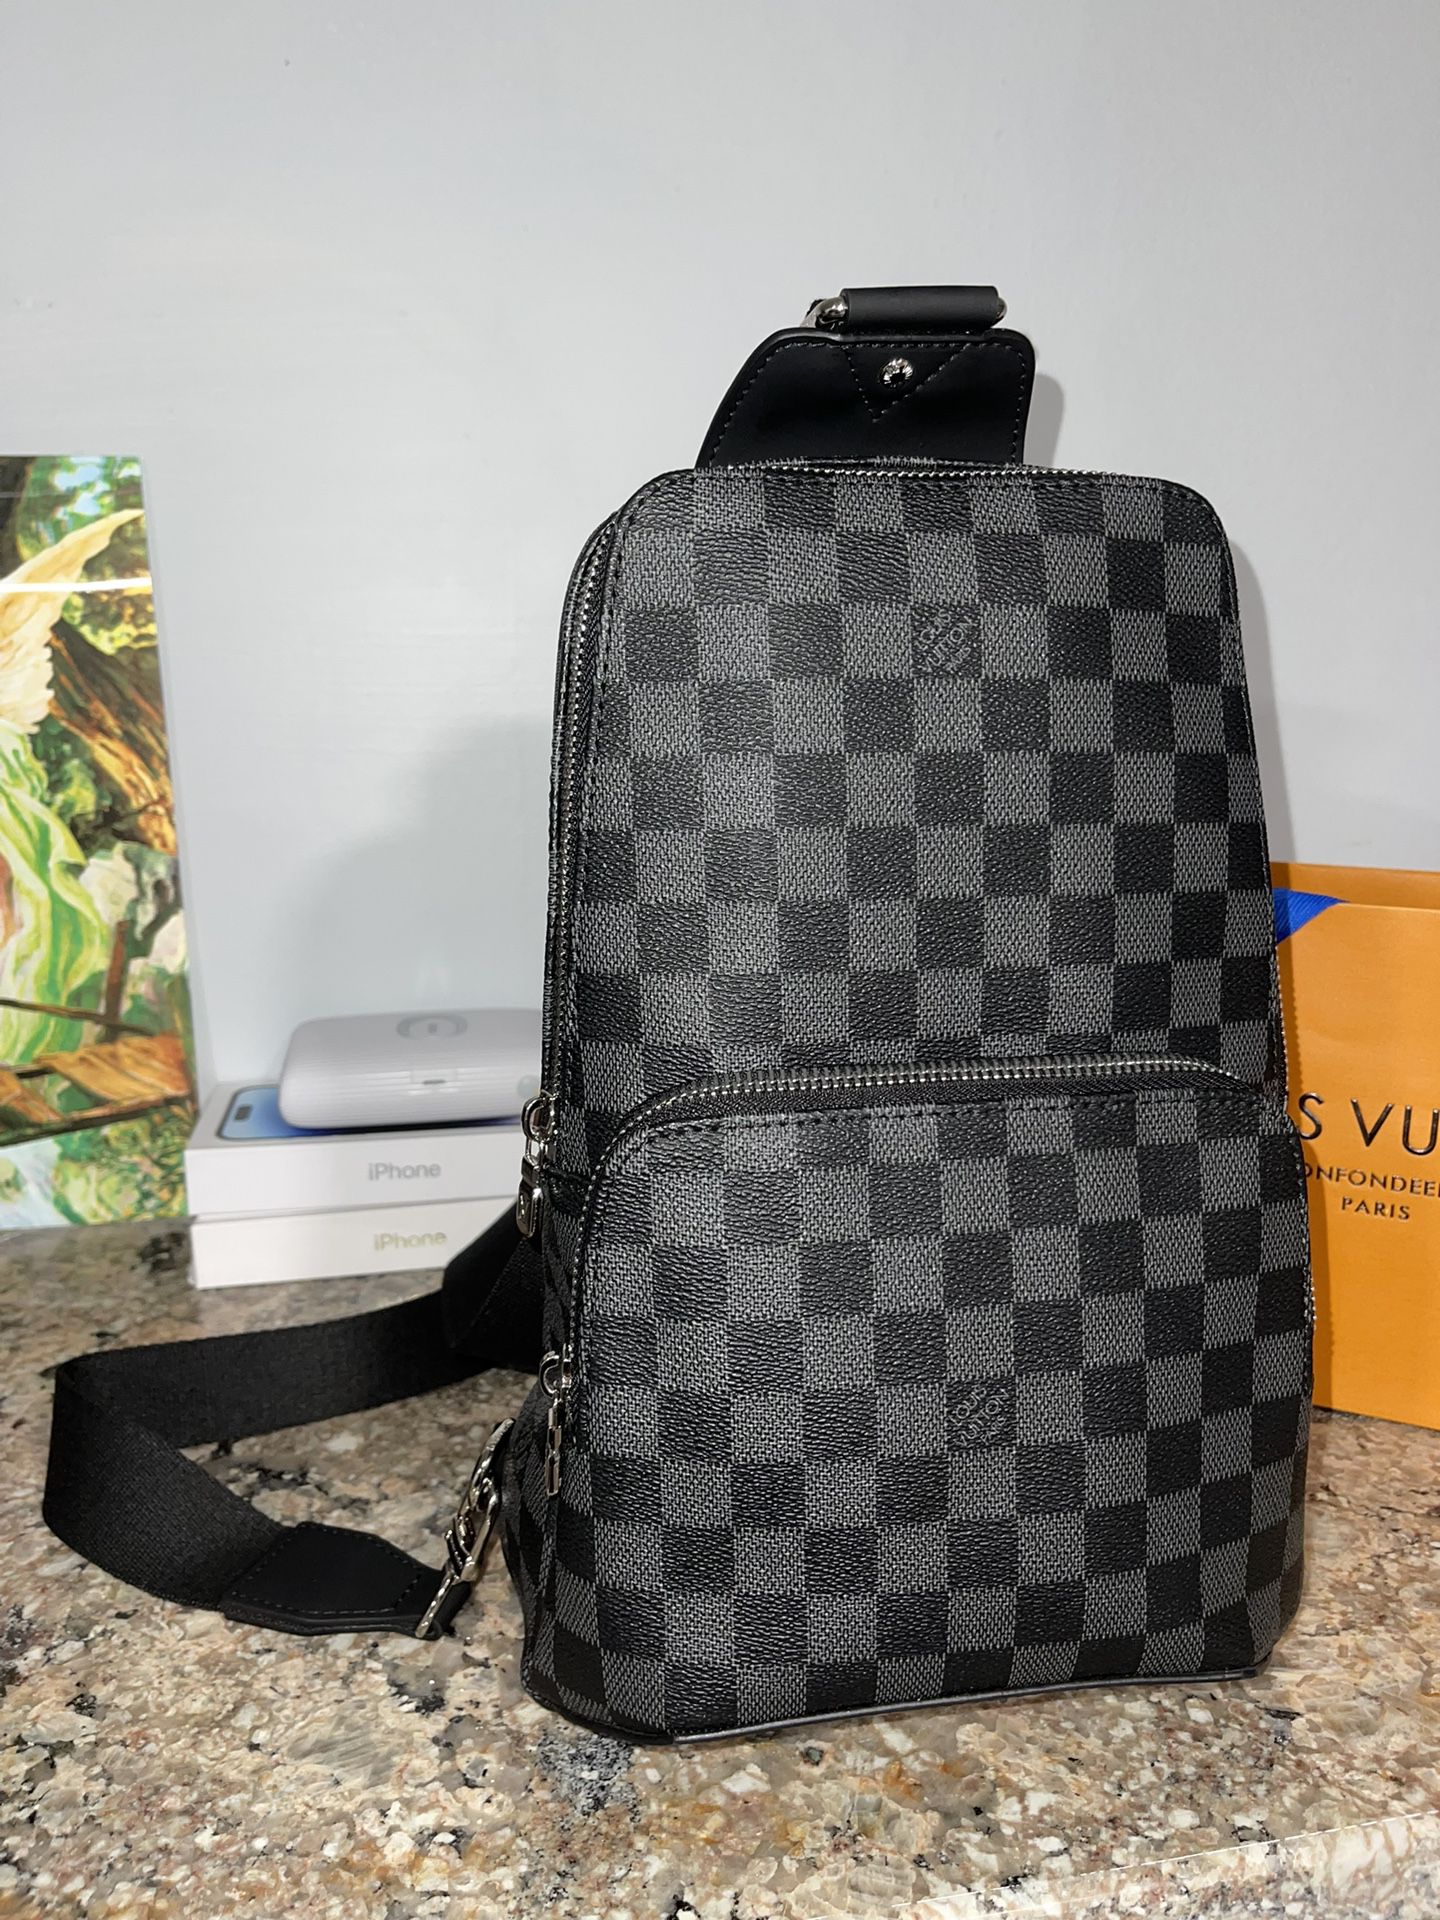 Louis Vuitton Sling Bag Men for Sale in New York, NY - OfferUp